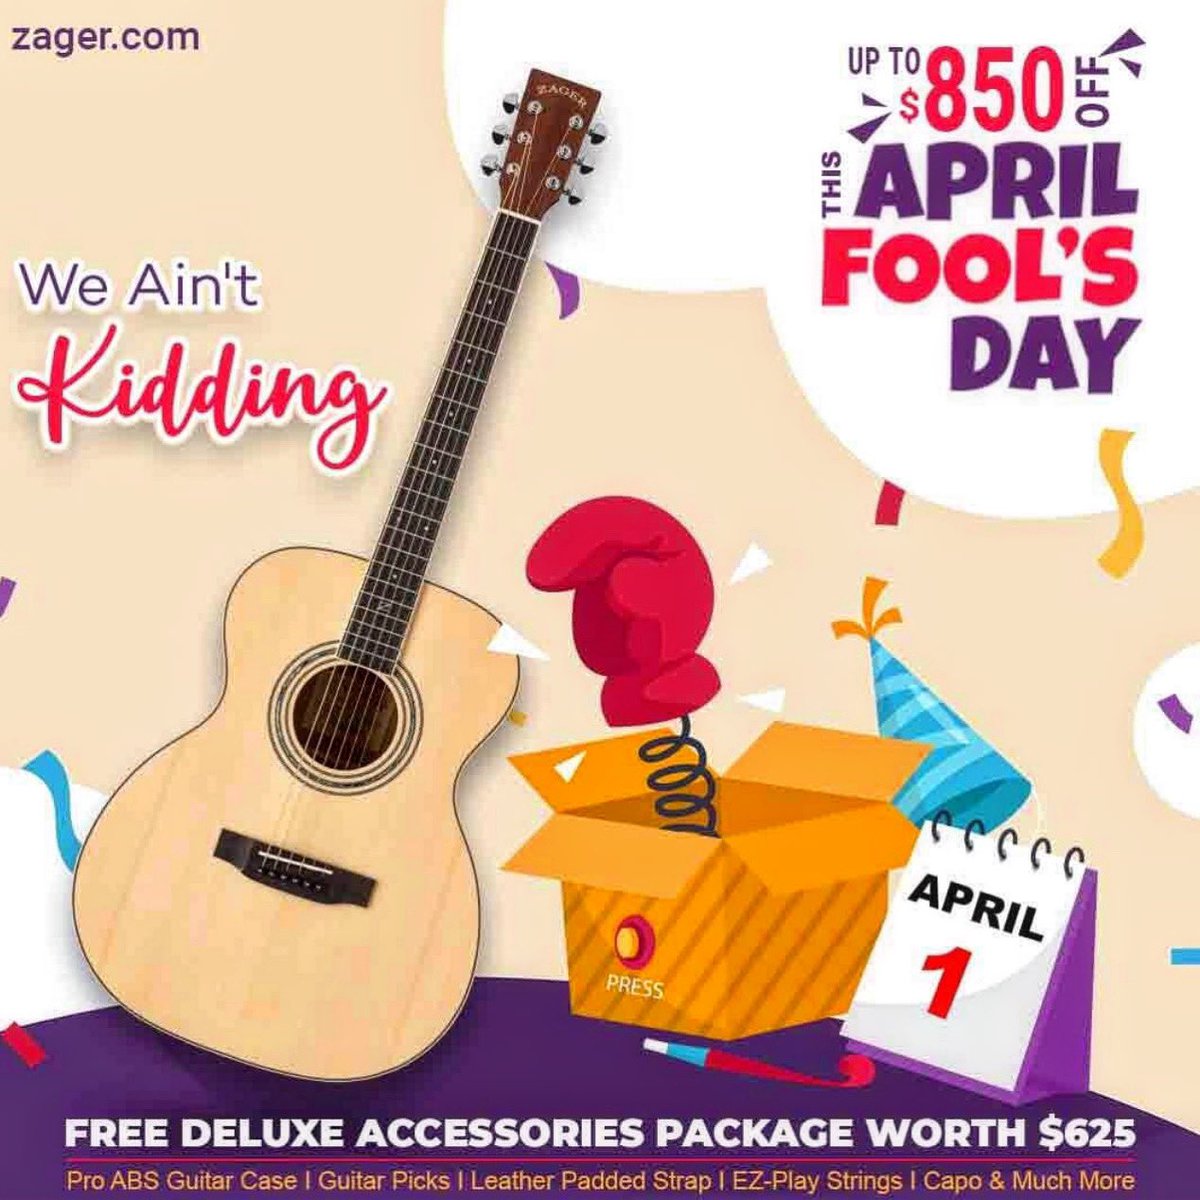 We're not joking around when it comes to quality guitars! 😜 Celebrate #AprilFoolsDay with #Zager Guitars and save up to $850 on our most popular models at ZagerGuitar.com FREE Accessories Pack with every purchase! #ZagerGuitar #Guitar #GuitarSale #Sale #AprilFools